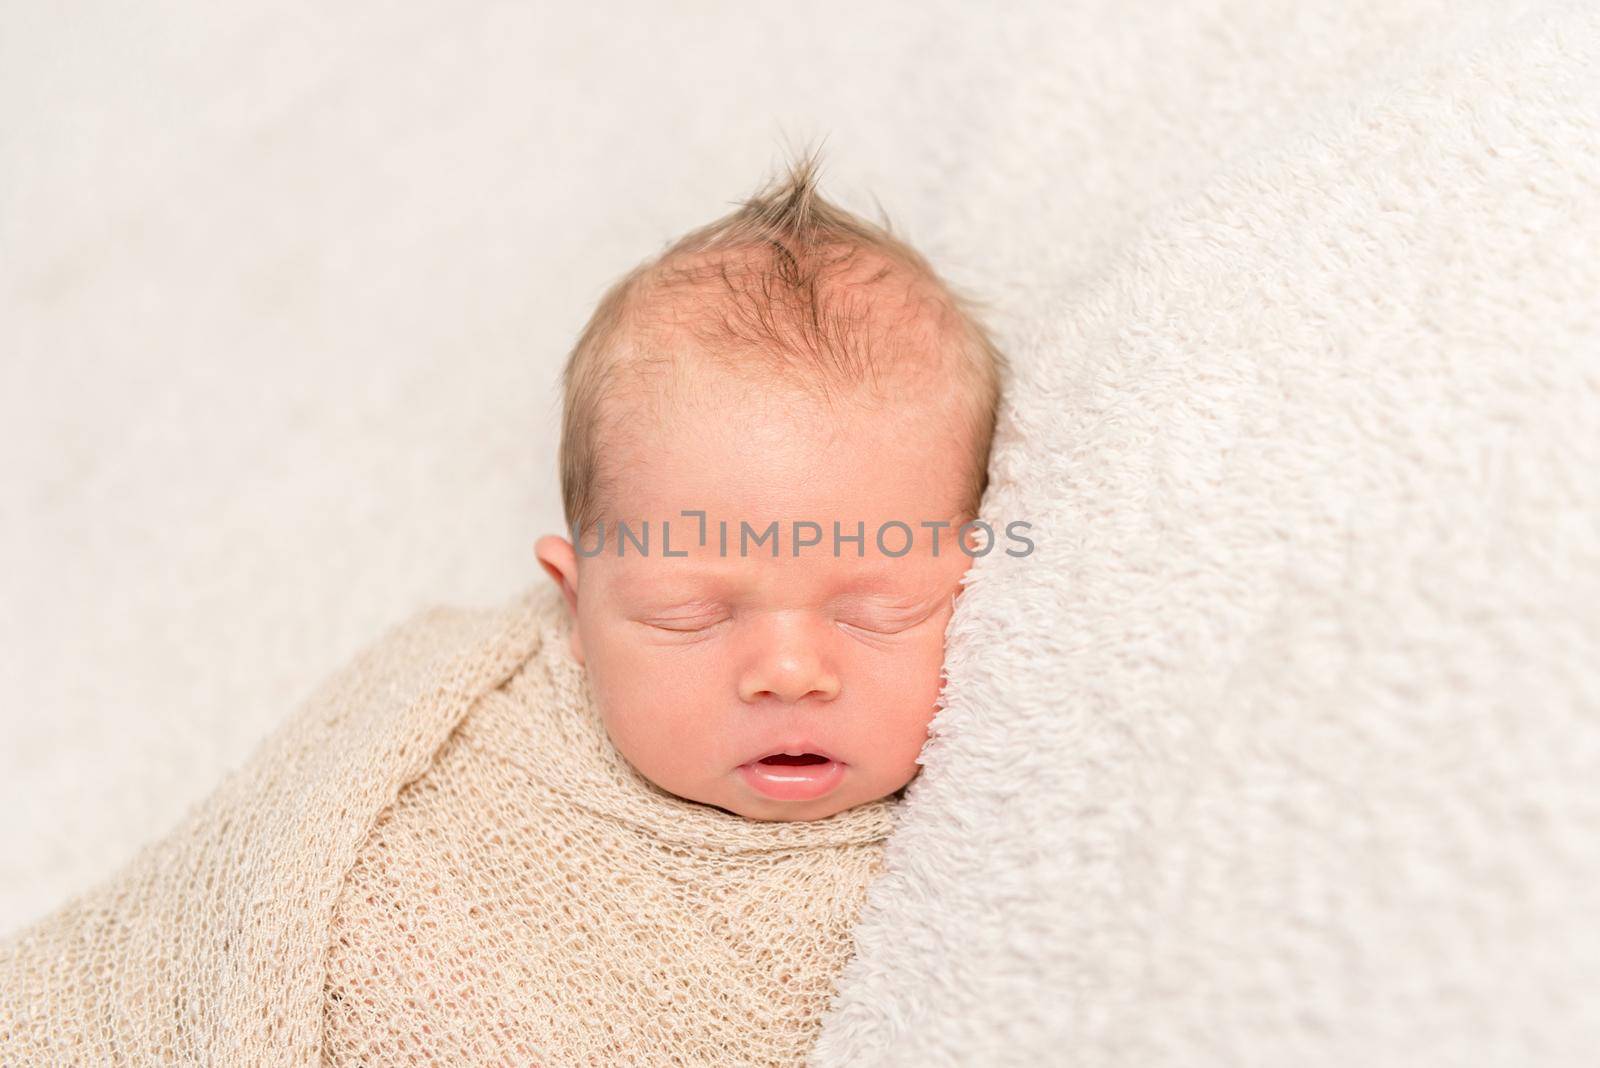 Infant with funny mimic, swaddled by tan4ikk1